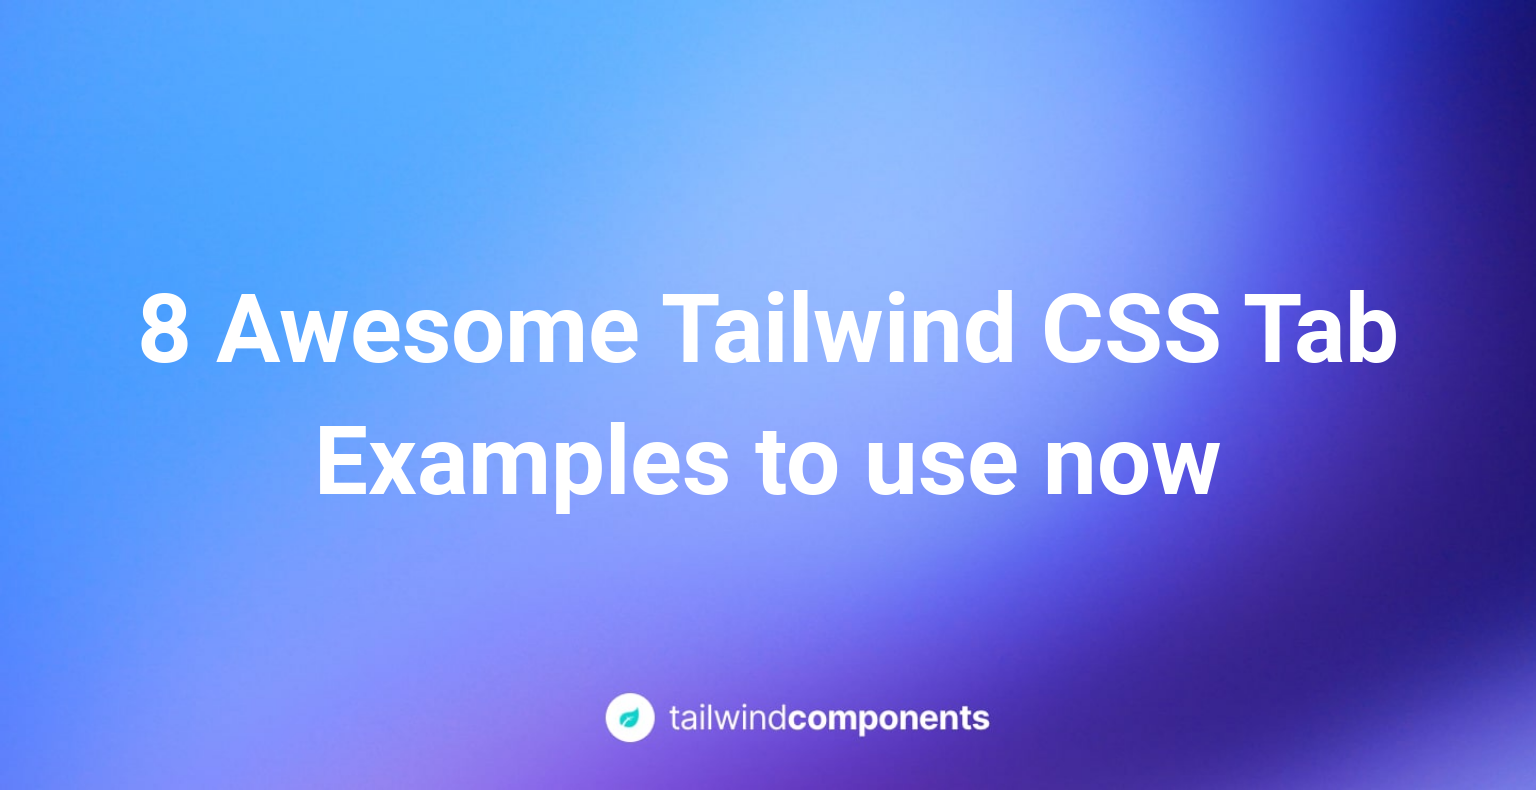 8 Awesome Tailwind CSS Tab Examples to use now Image